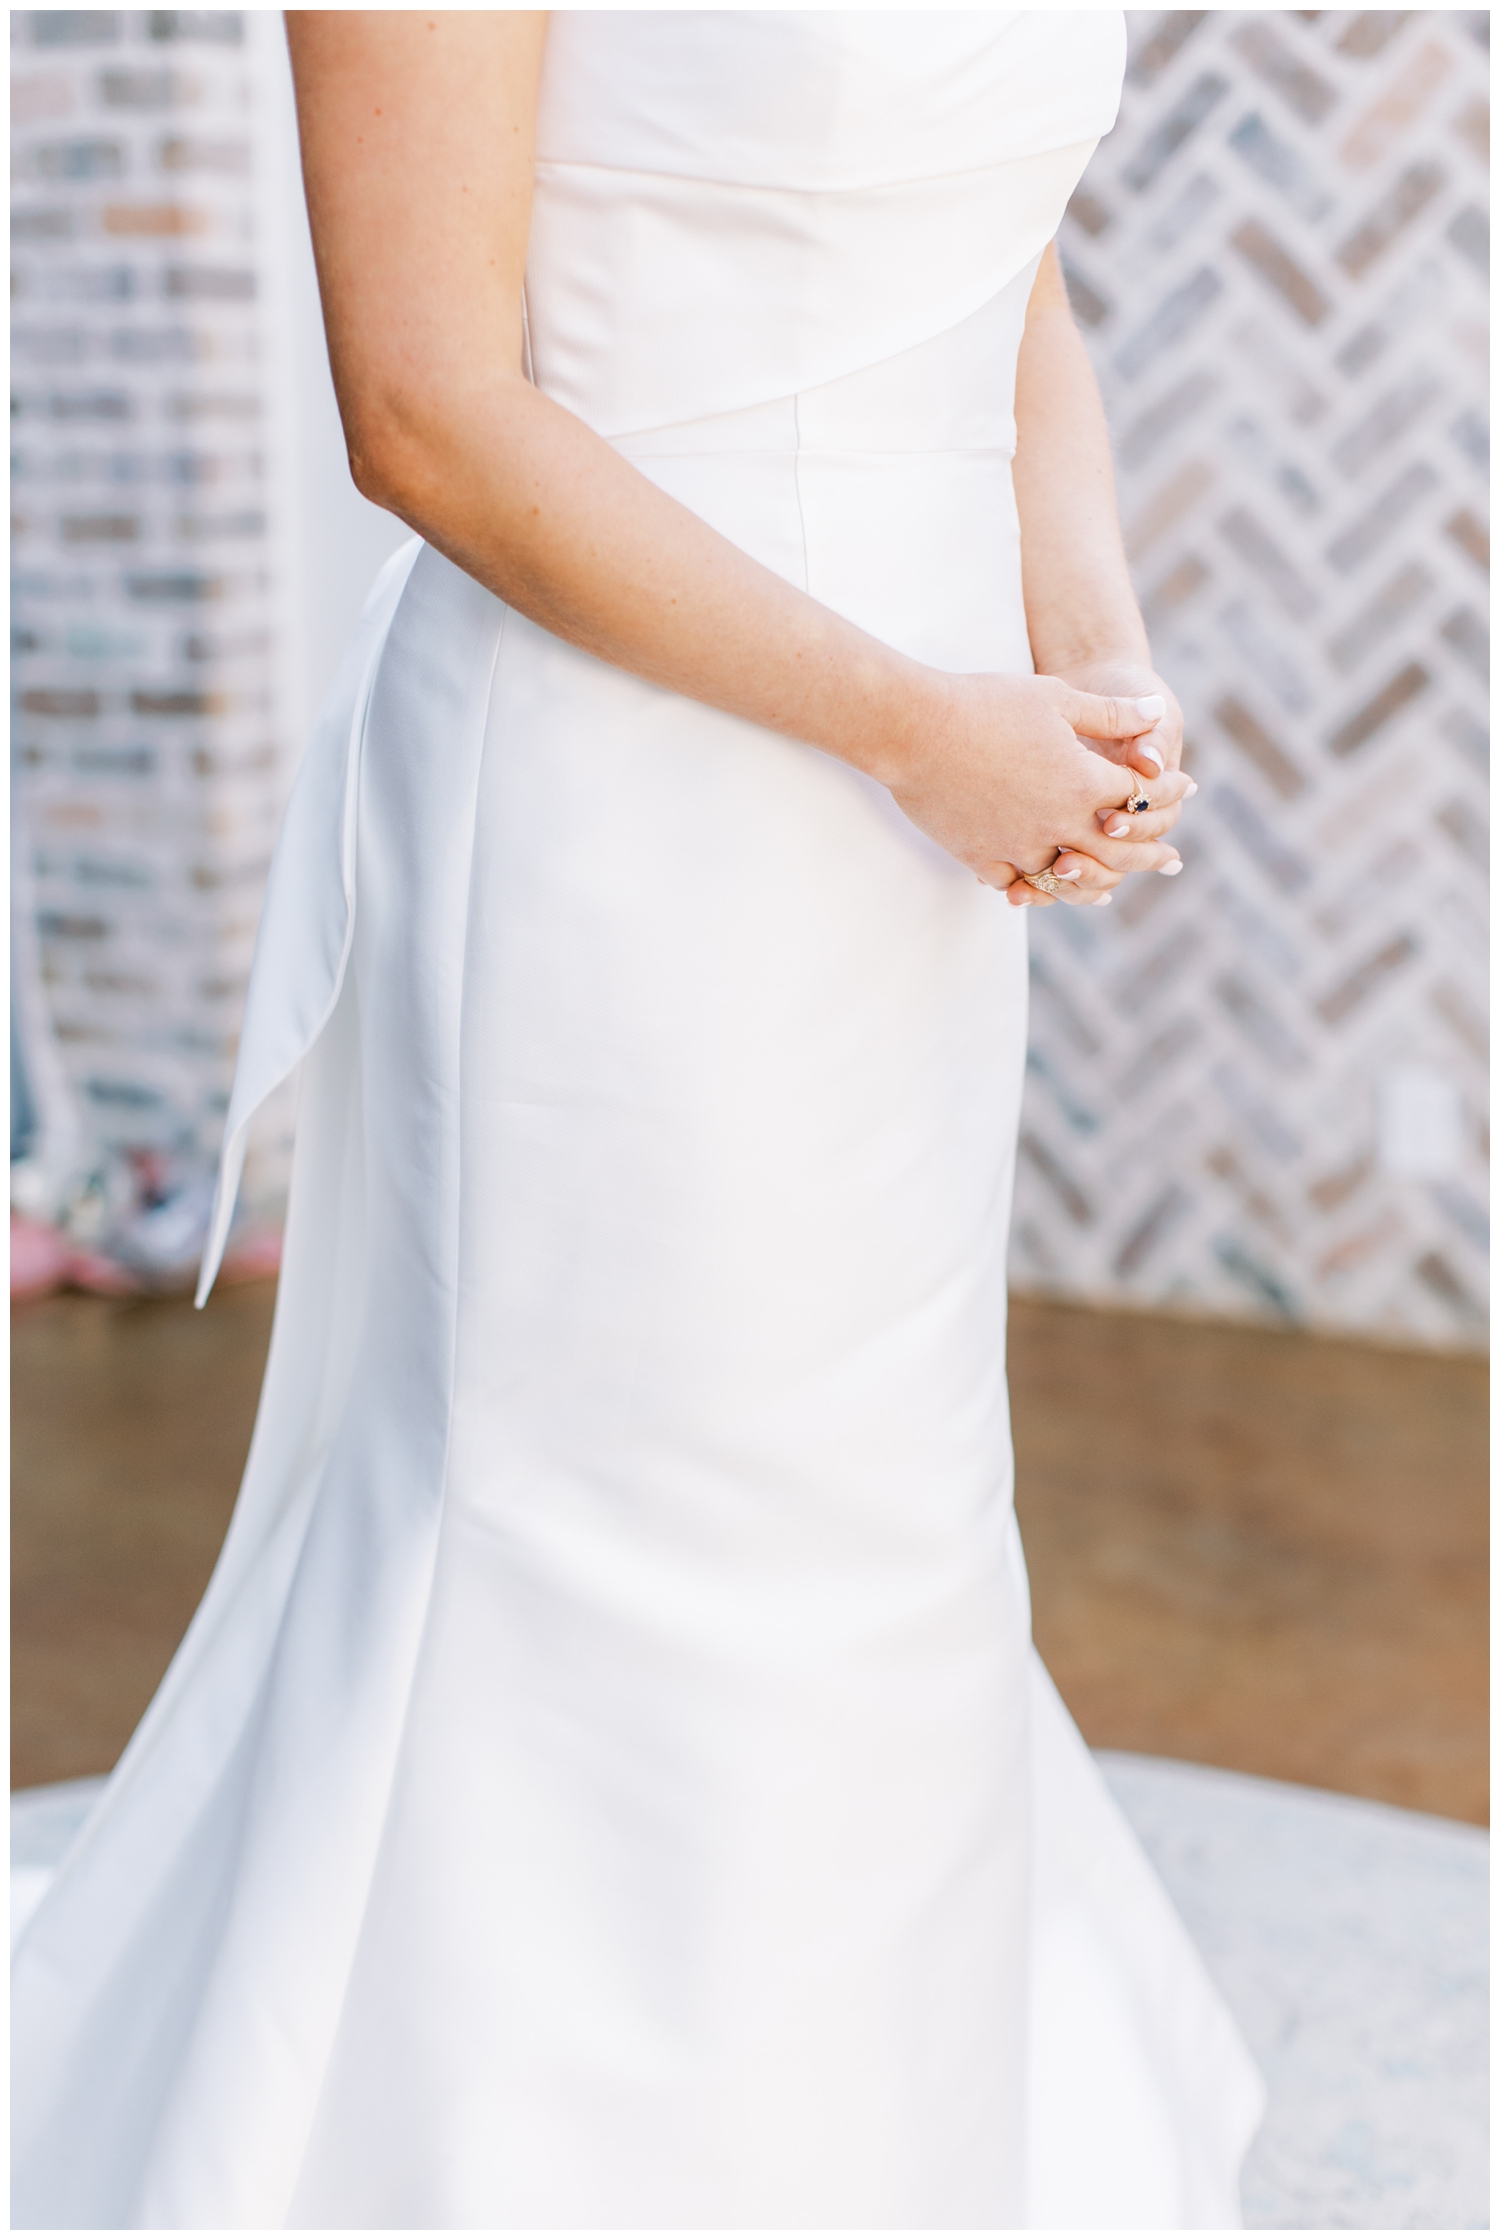 detailed image of bride in wedding gown with hands folded